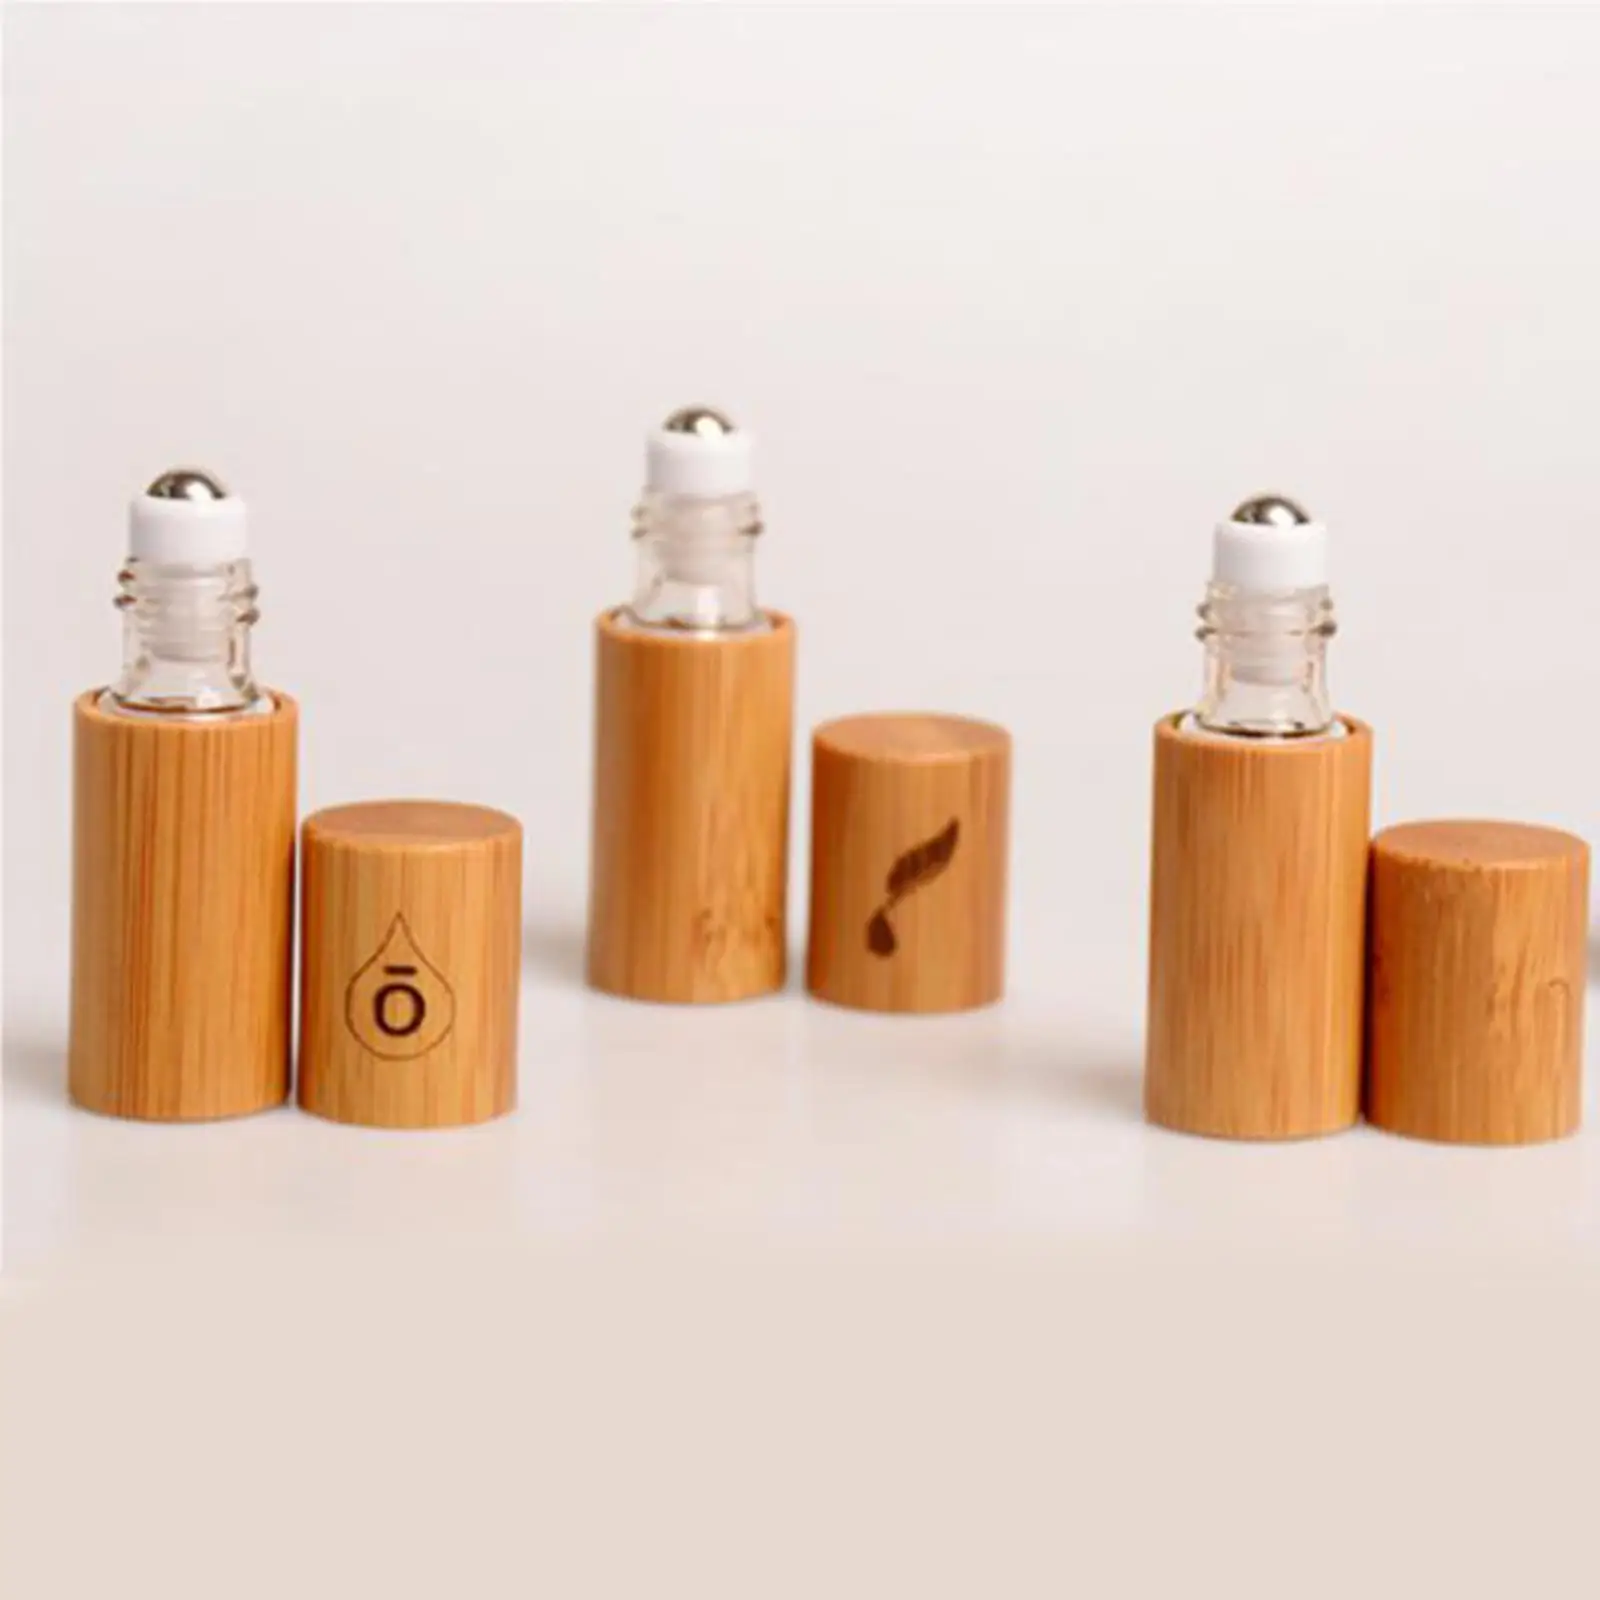 5ml Bamboo Essential Oil Roller Bottles Roll On for Lip Gloss Eye Cream Storage DIY Homemade Cosmetic Product Elegant Convenient